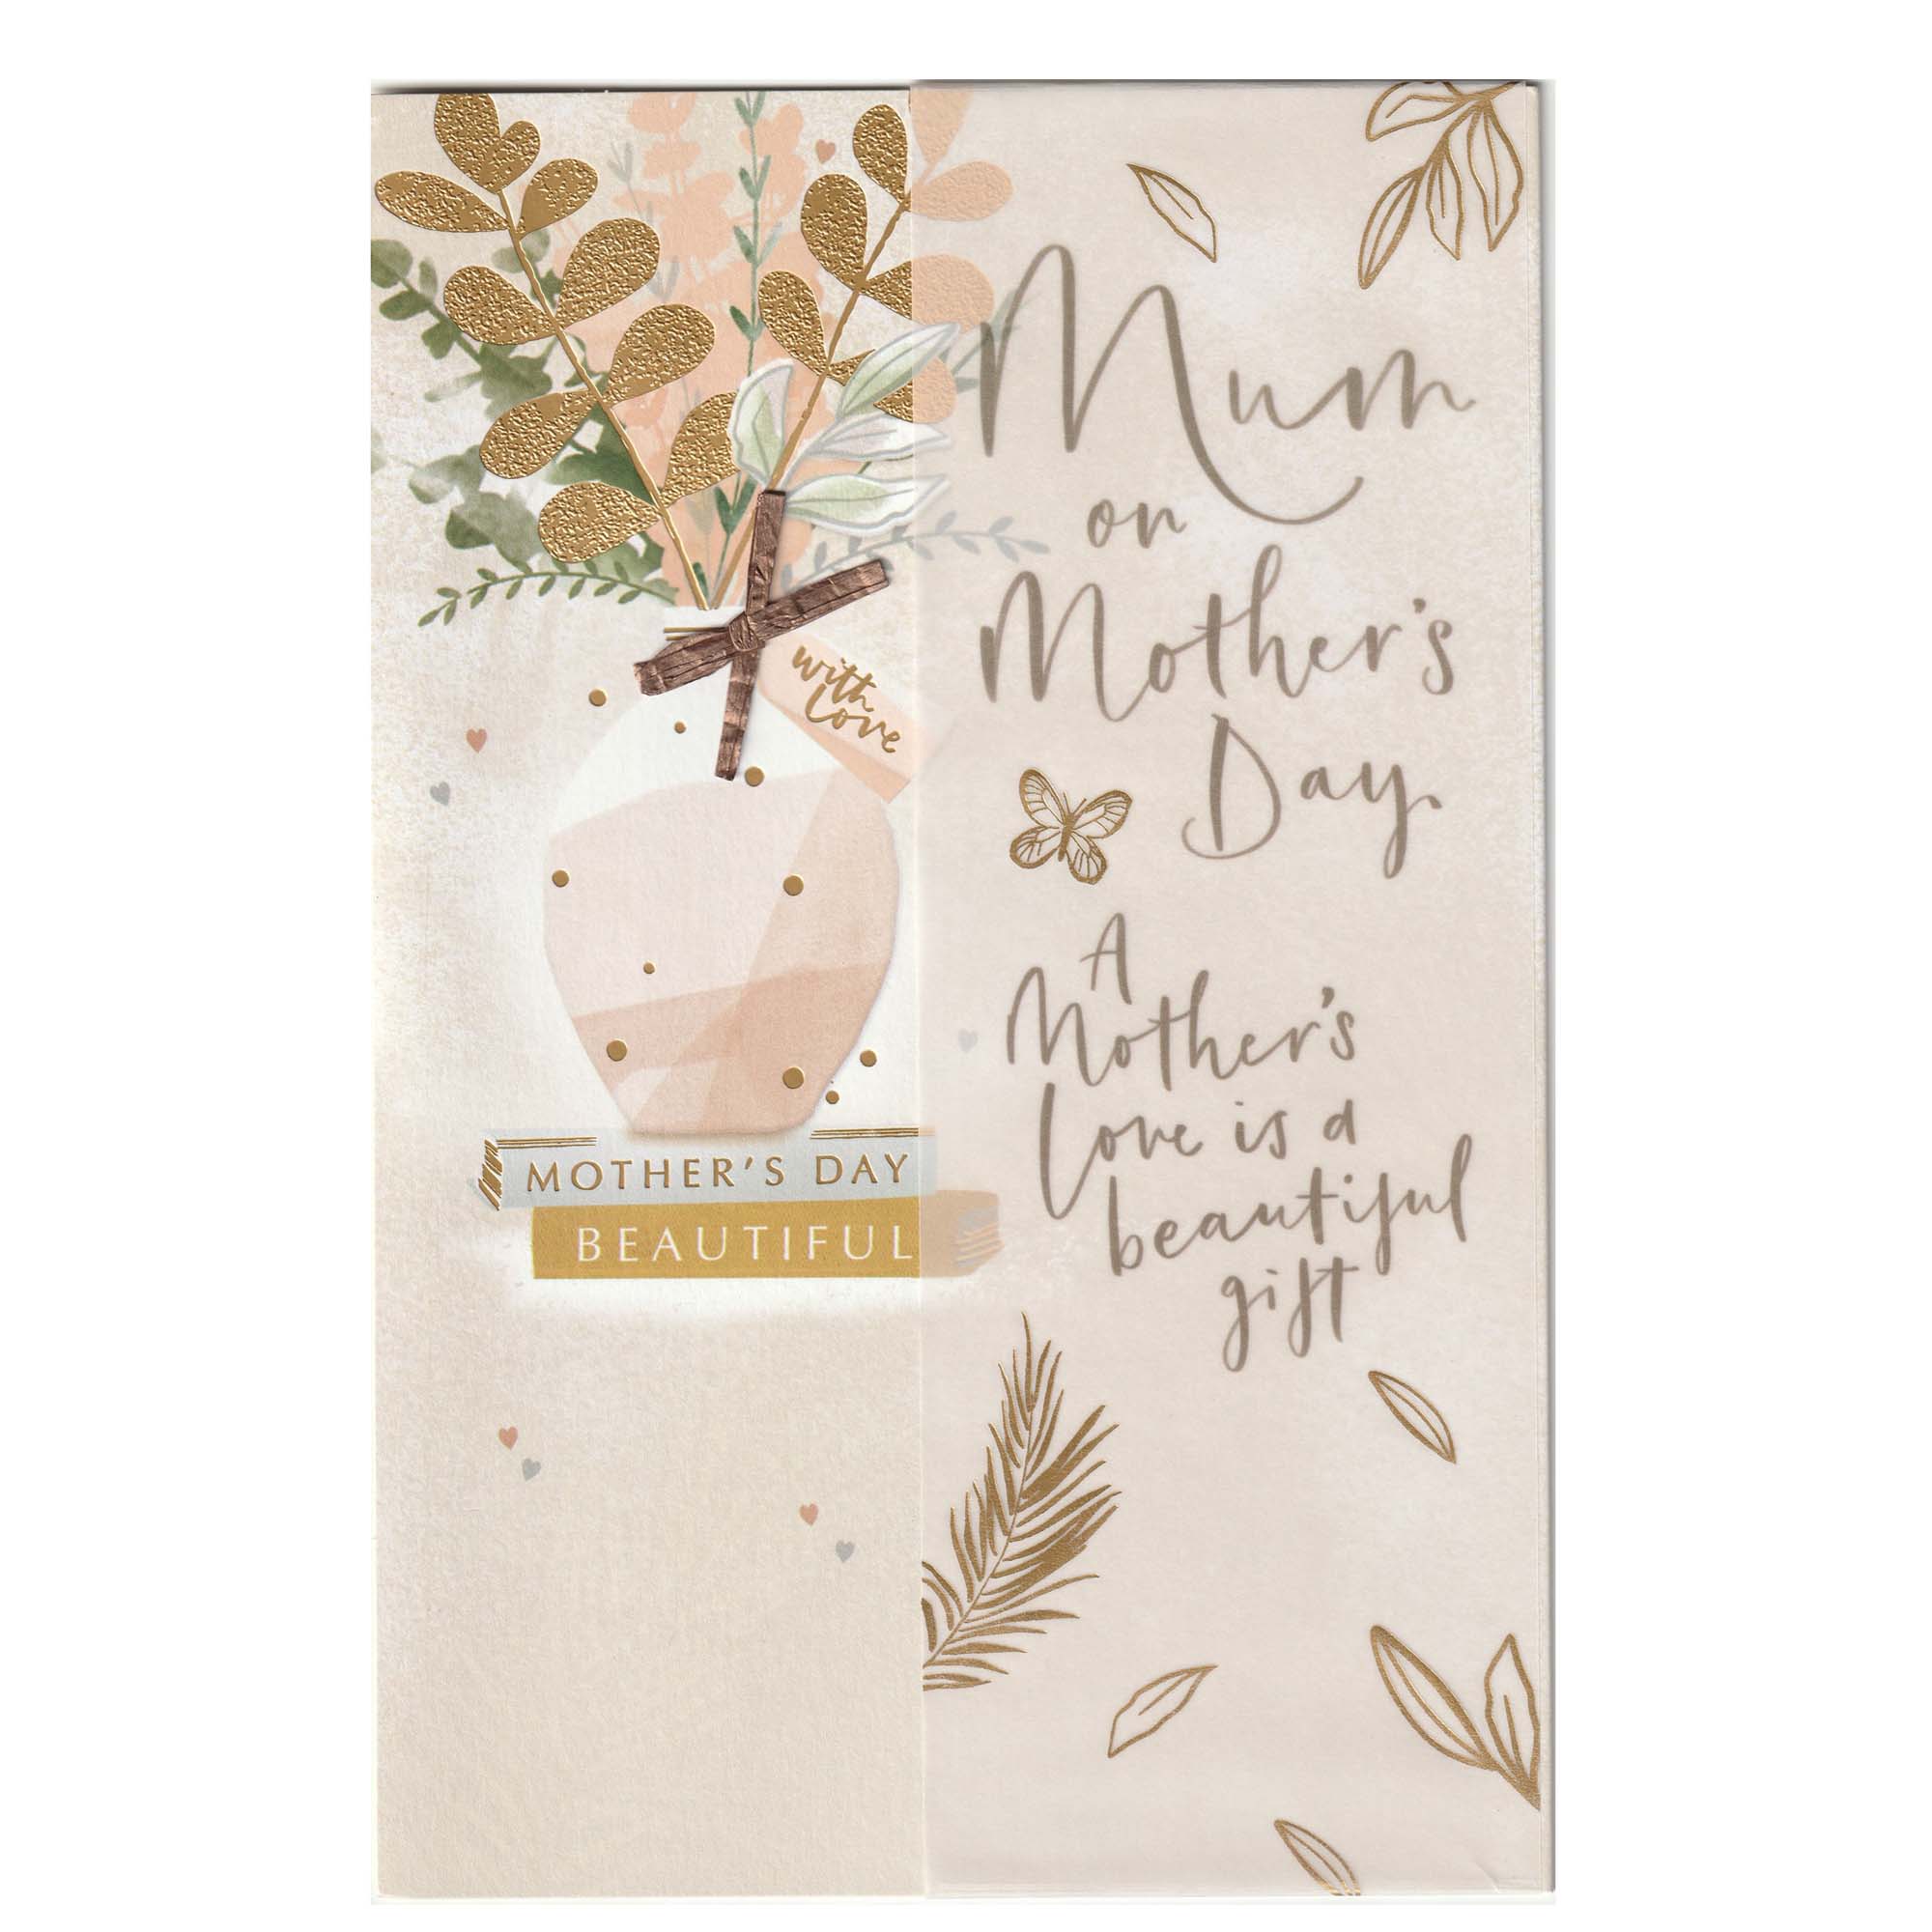 Mum's Love Is A Beautiful Gift Mothers Day Greeting Card